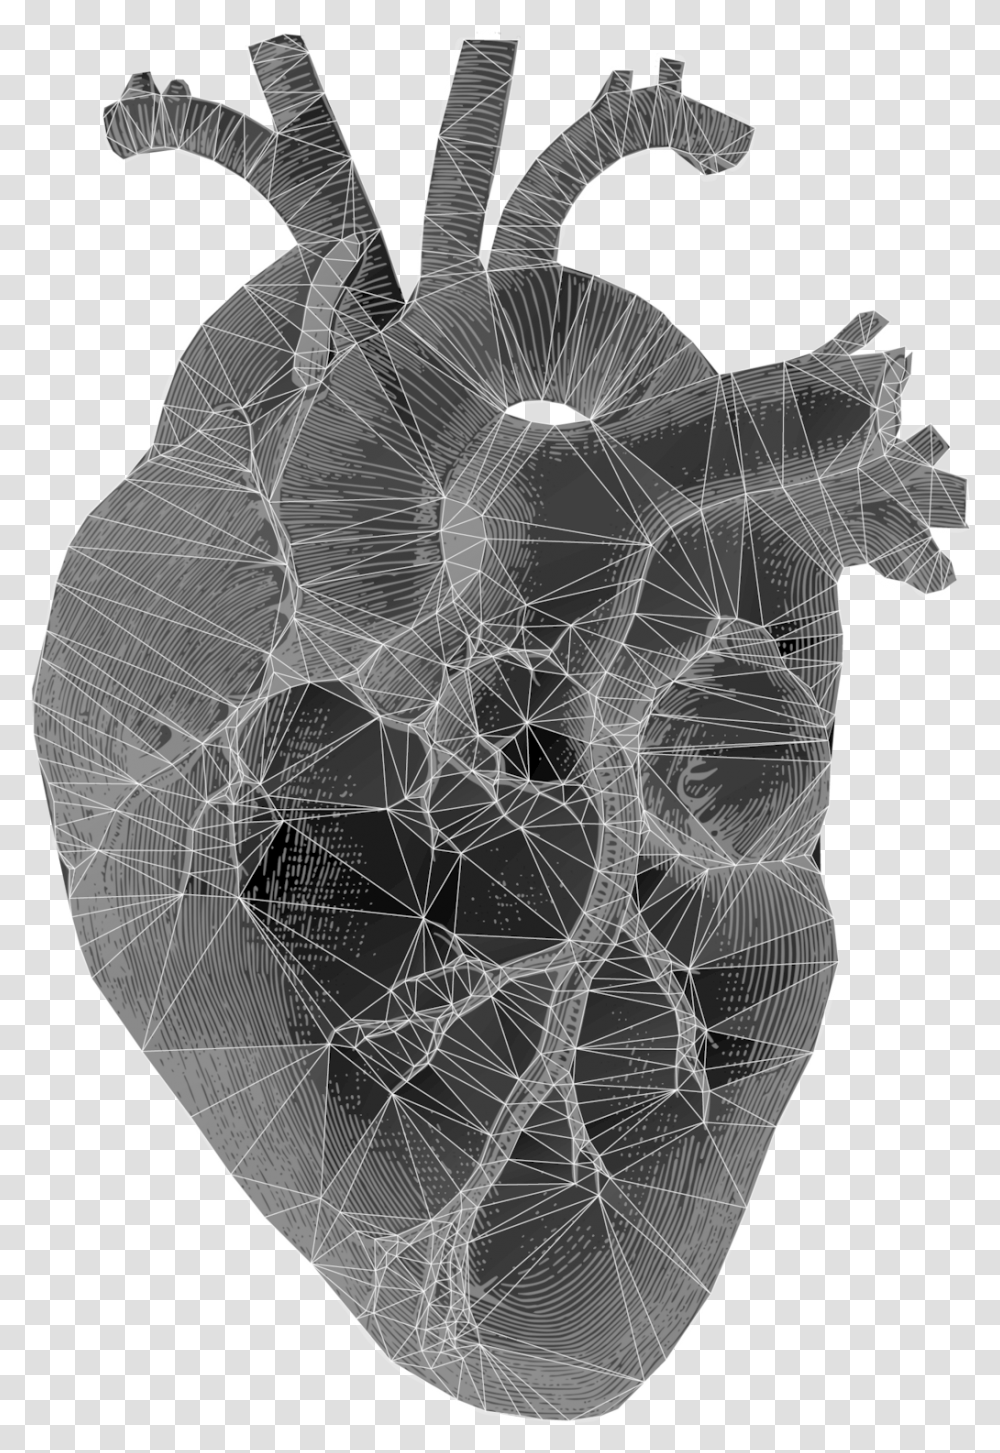 Realistic Heart 3 Image Heaven Shall Burn Invictus, Spider Web Transparent Png